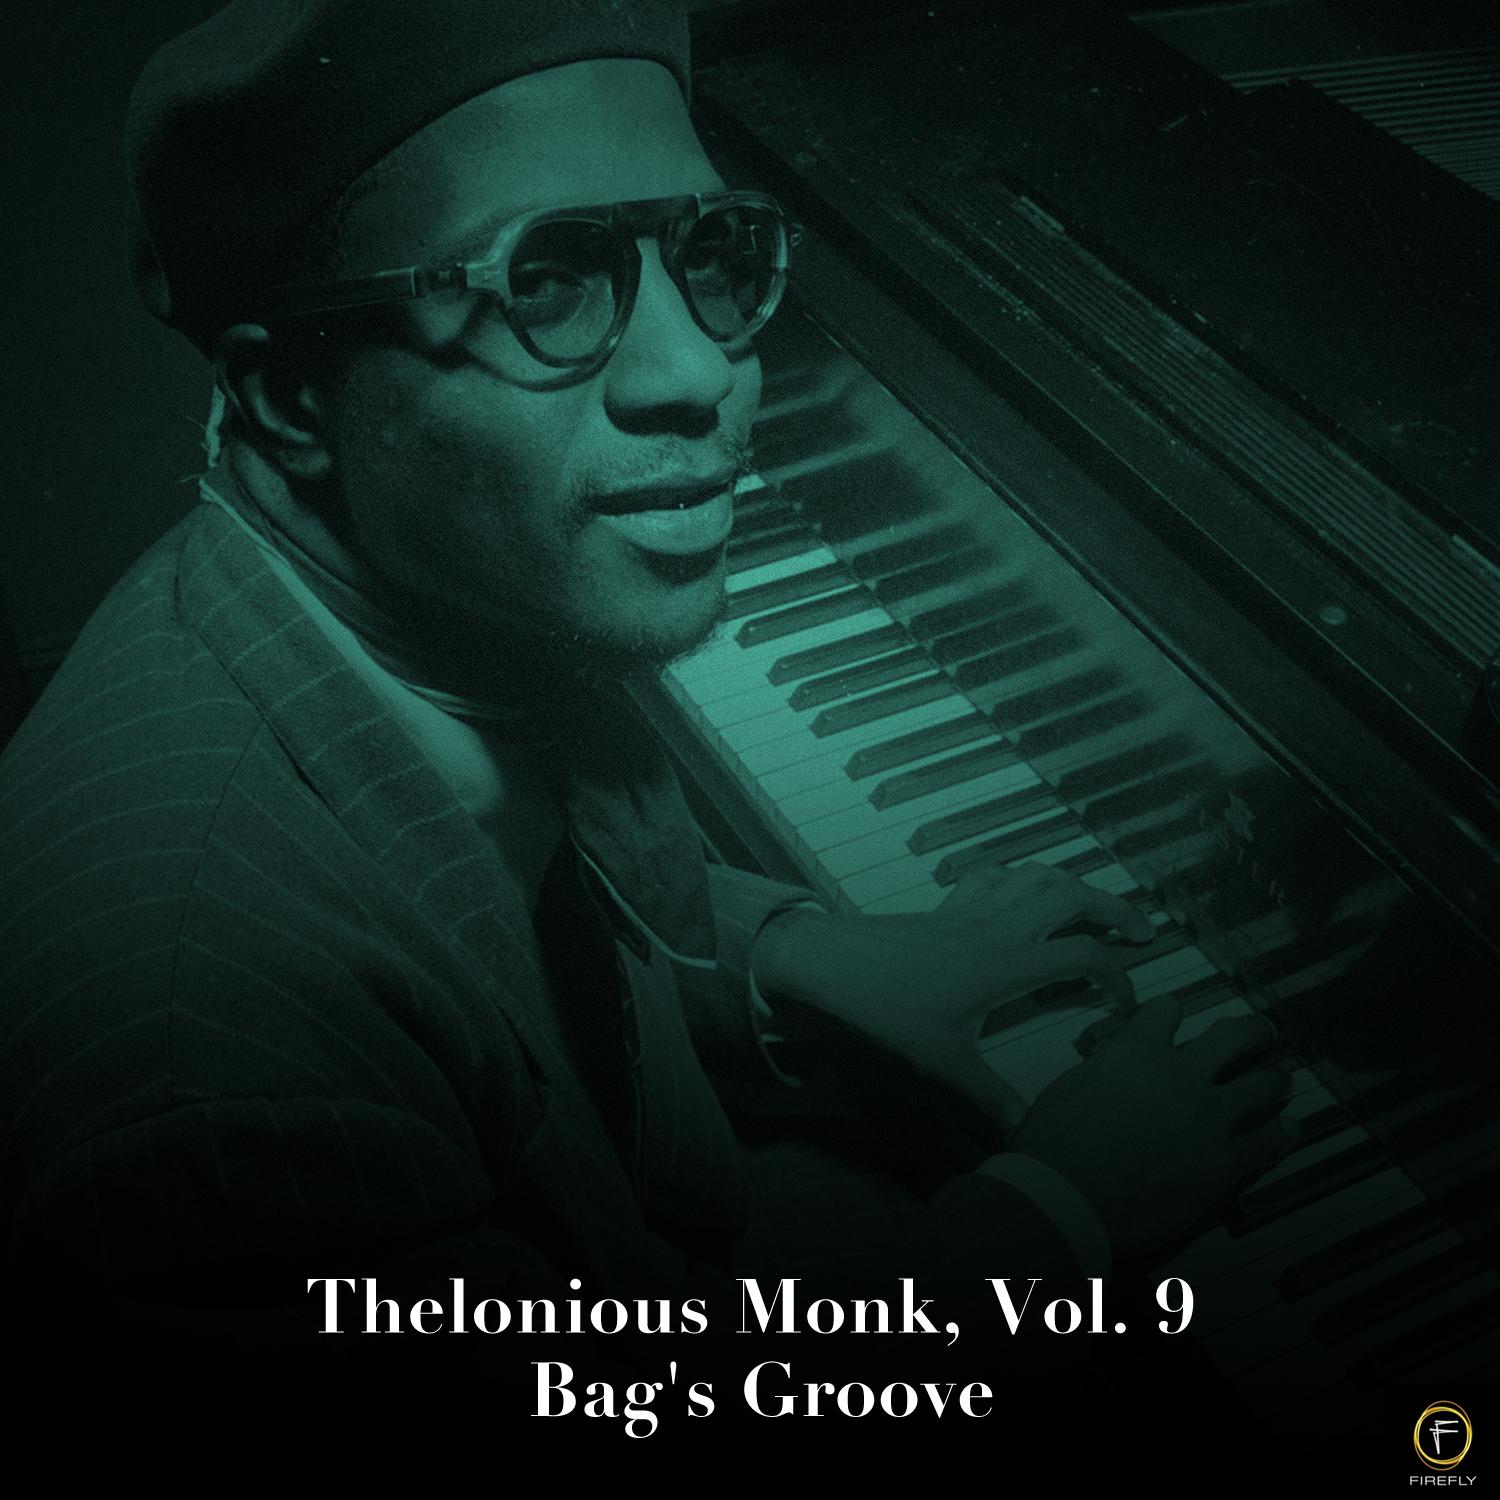 Thelonious Monk, Vol. 9: Bag's Groove